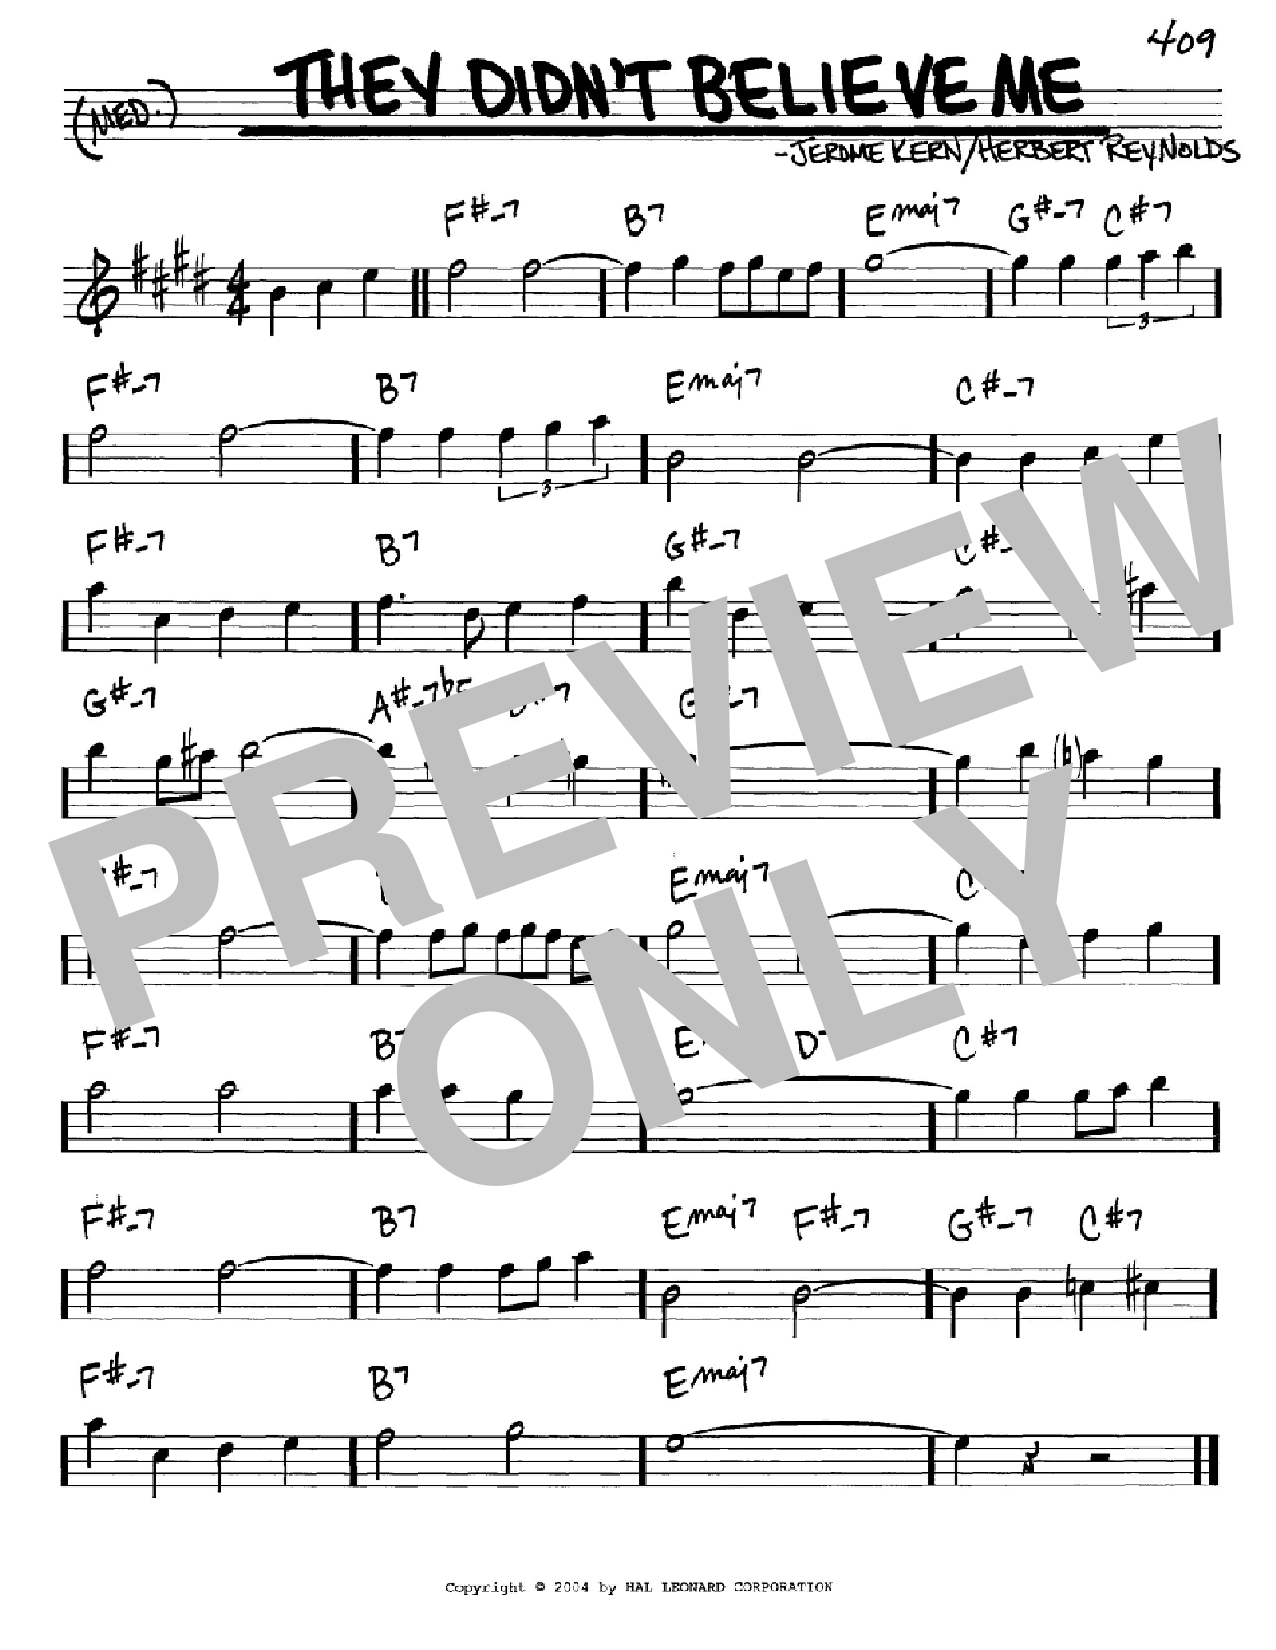 Download Jerome Kern They Didn't Believe Me Sheet Music